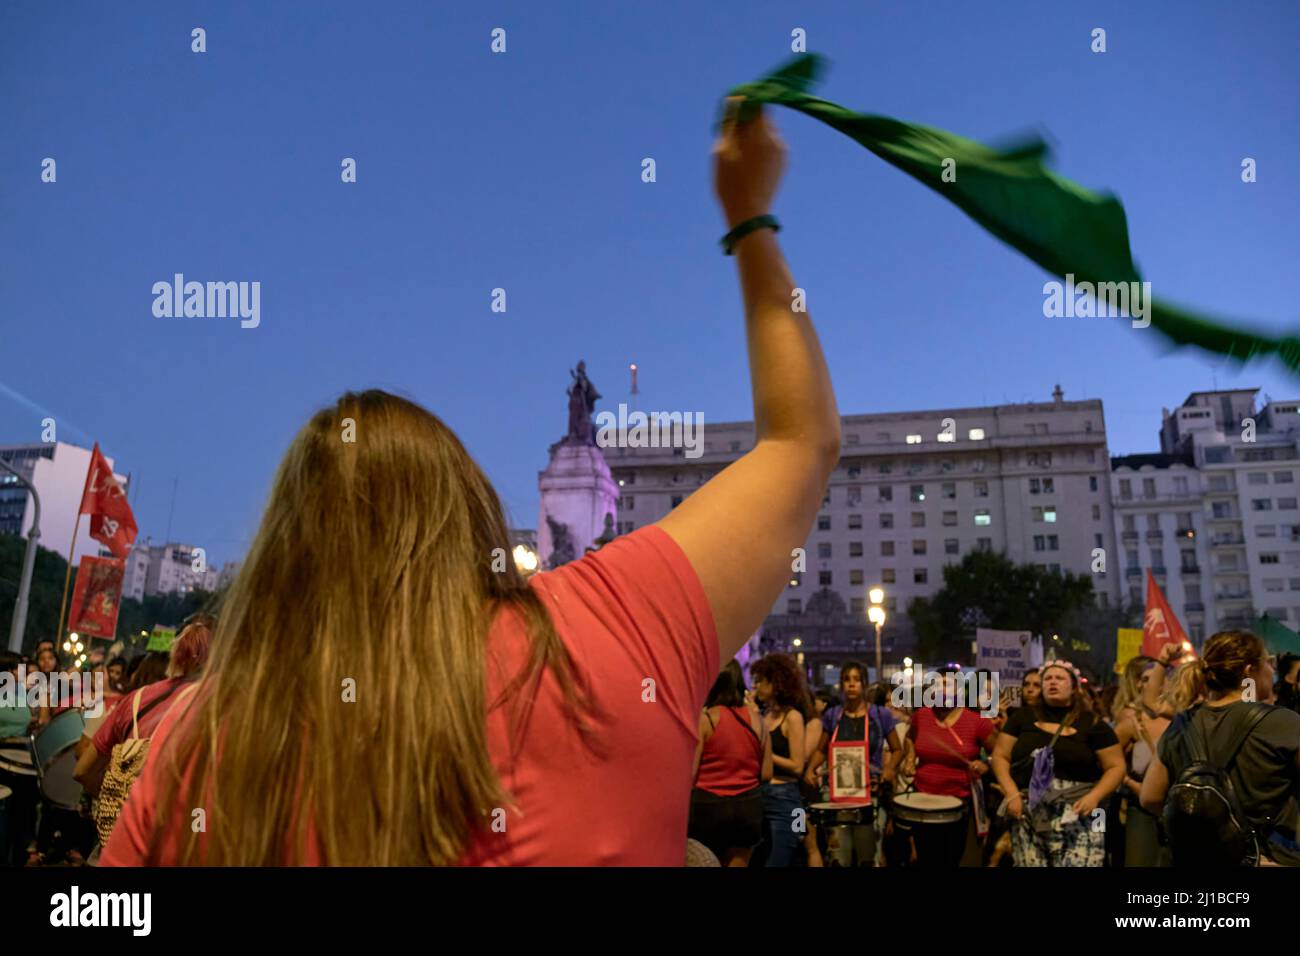 Buenos Aires, Argentina; March 8, 2022: Manuela Castaneira, leader of Nuevo MAS and Las Rojas, seen from behind cheering a group of women and waving a Stock Photo